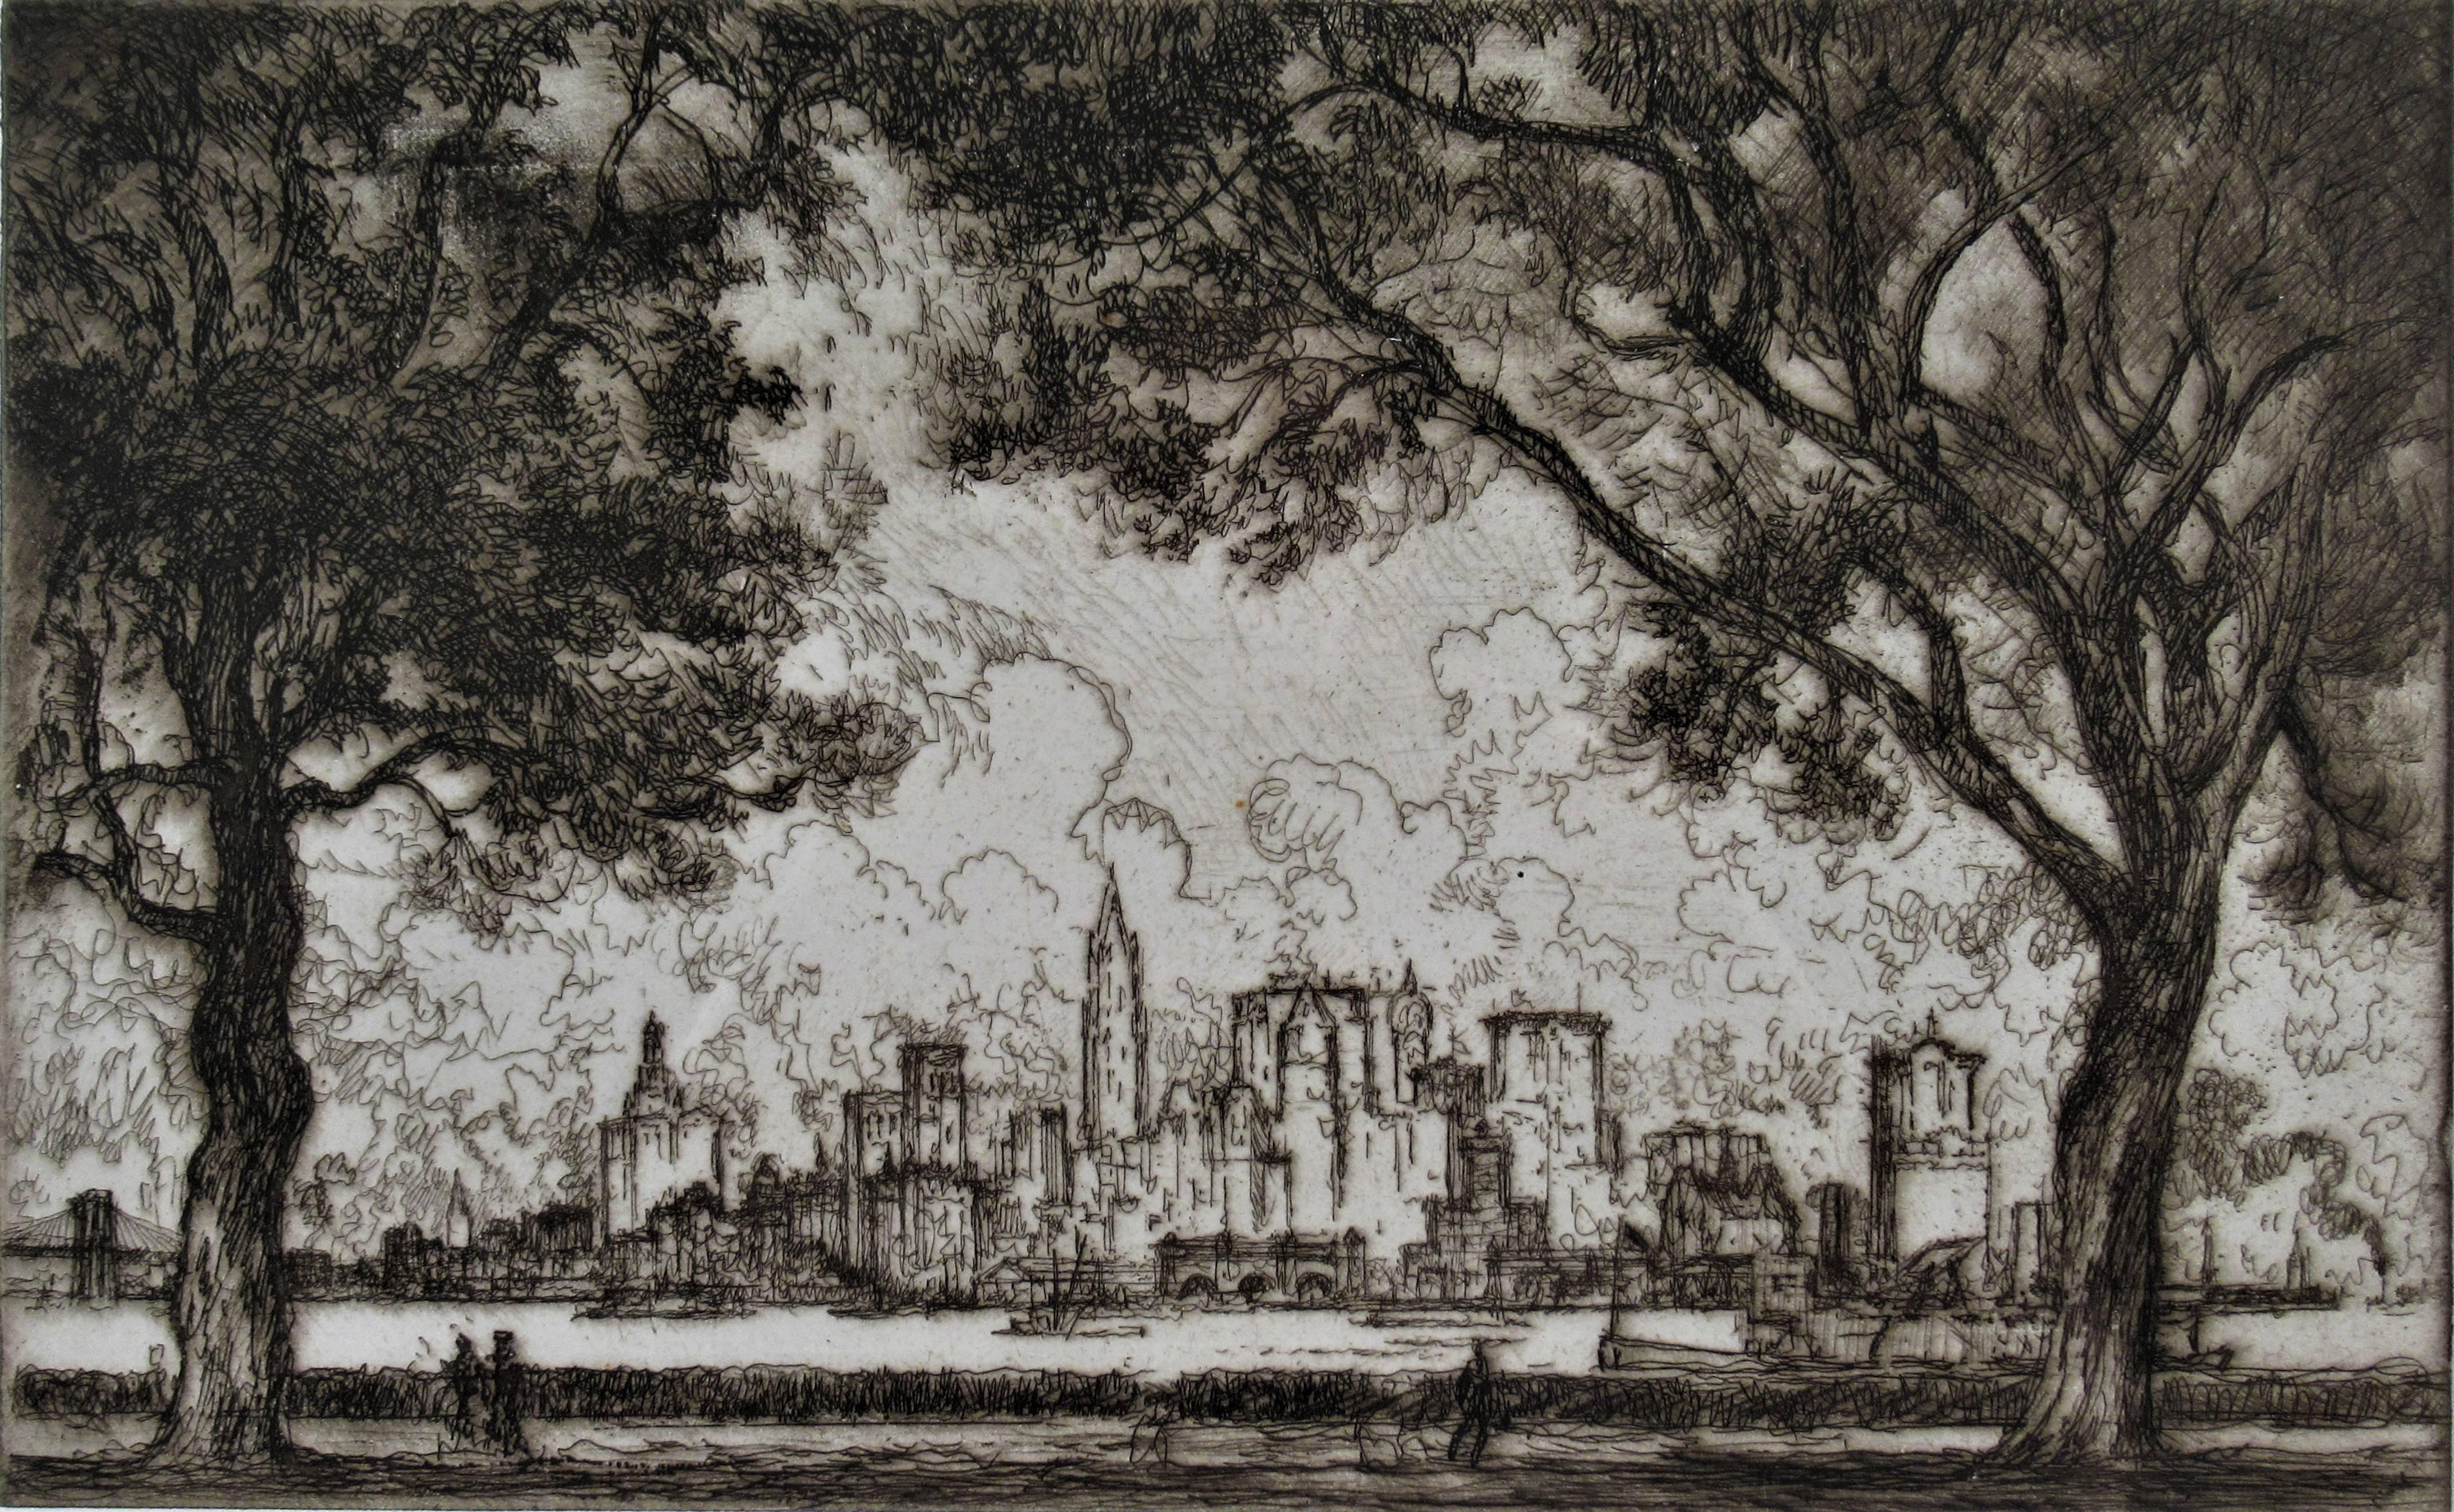 New York from Governor's Island - Print by Joseph Pennell